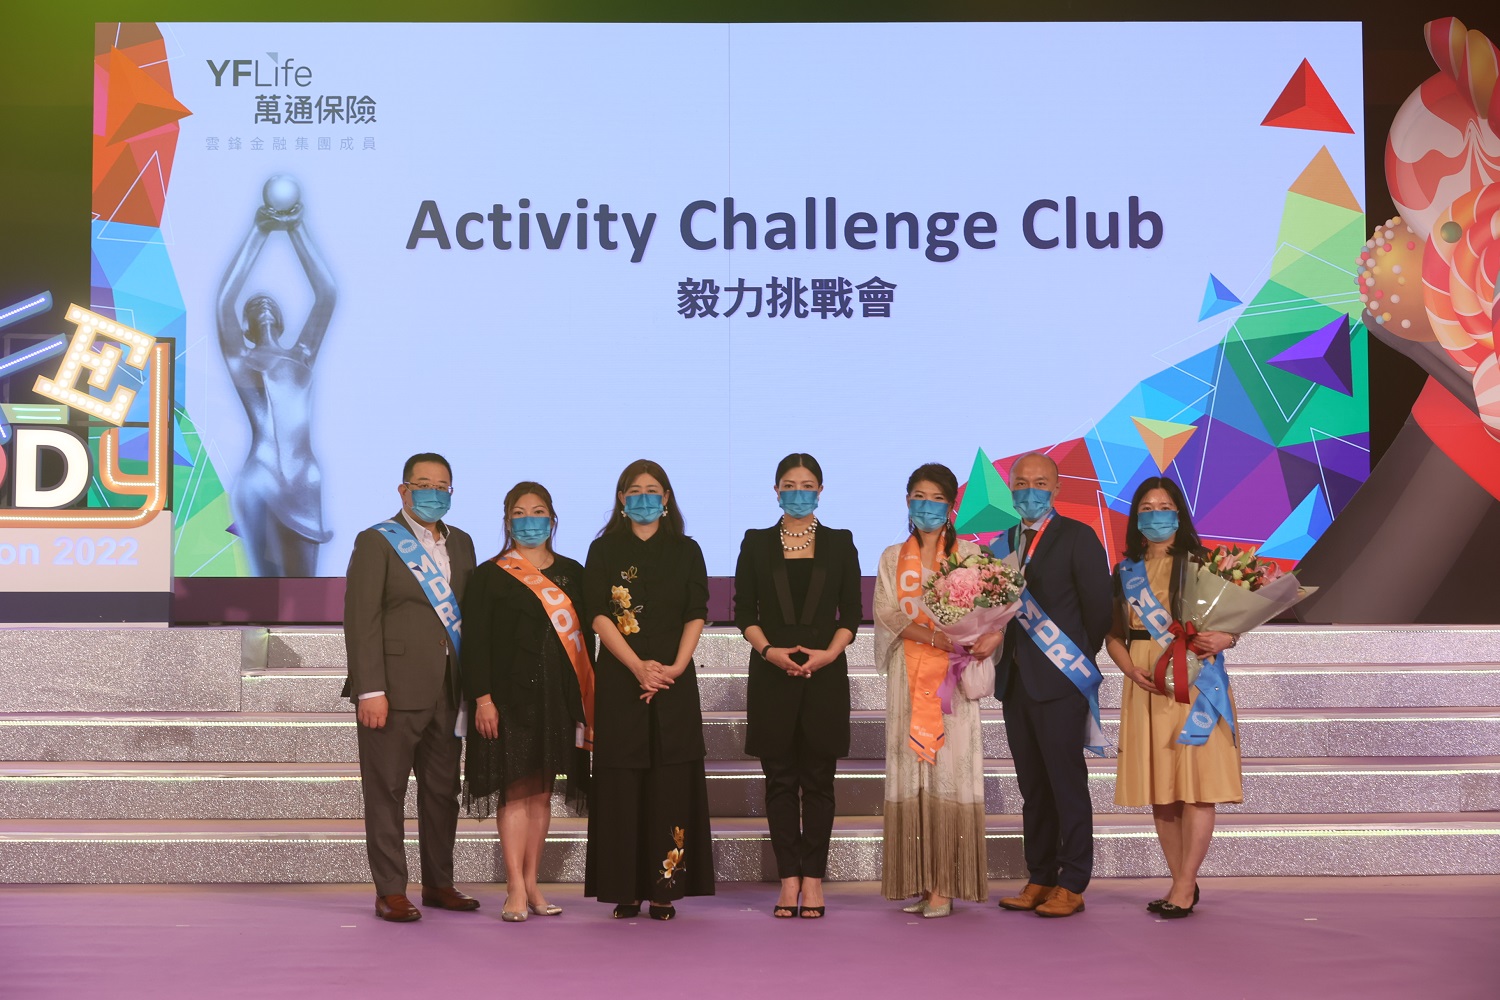 Members of the Activity Challenge Club. 